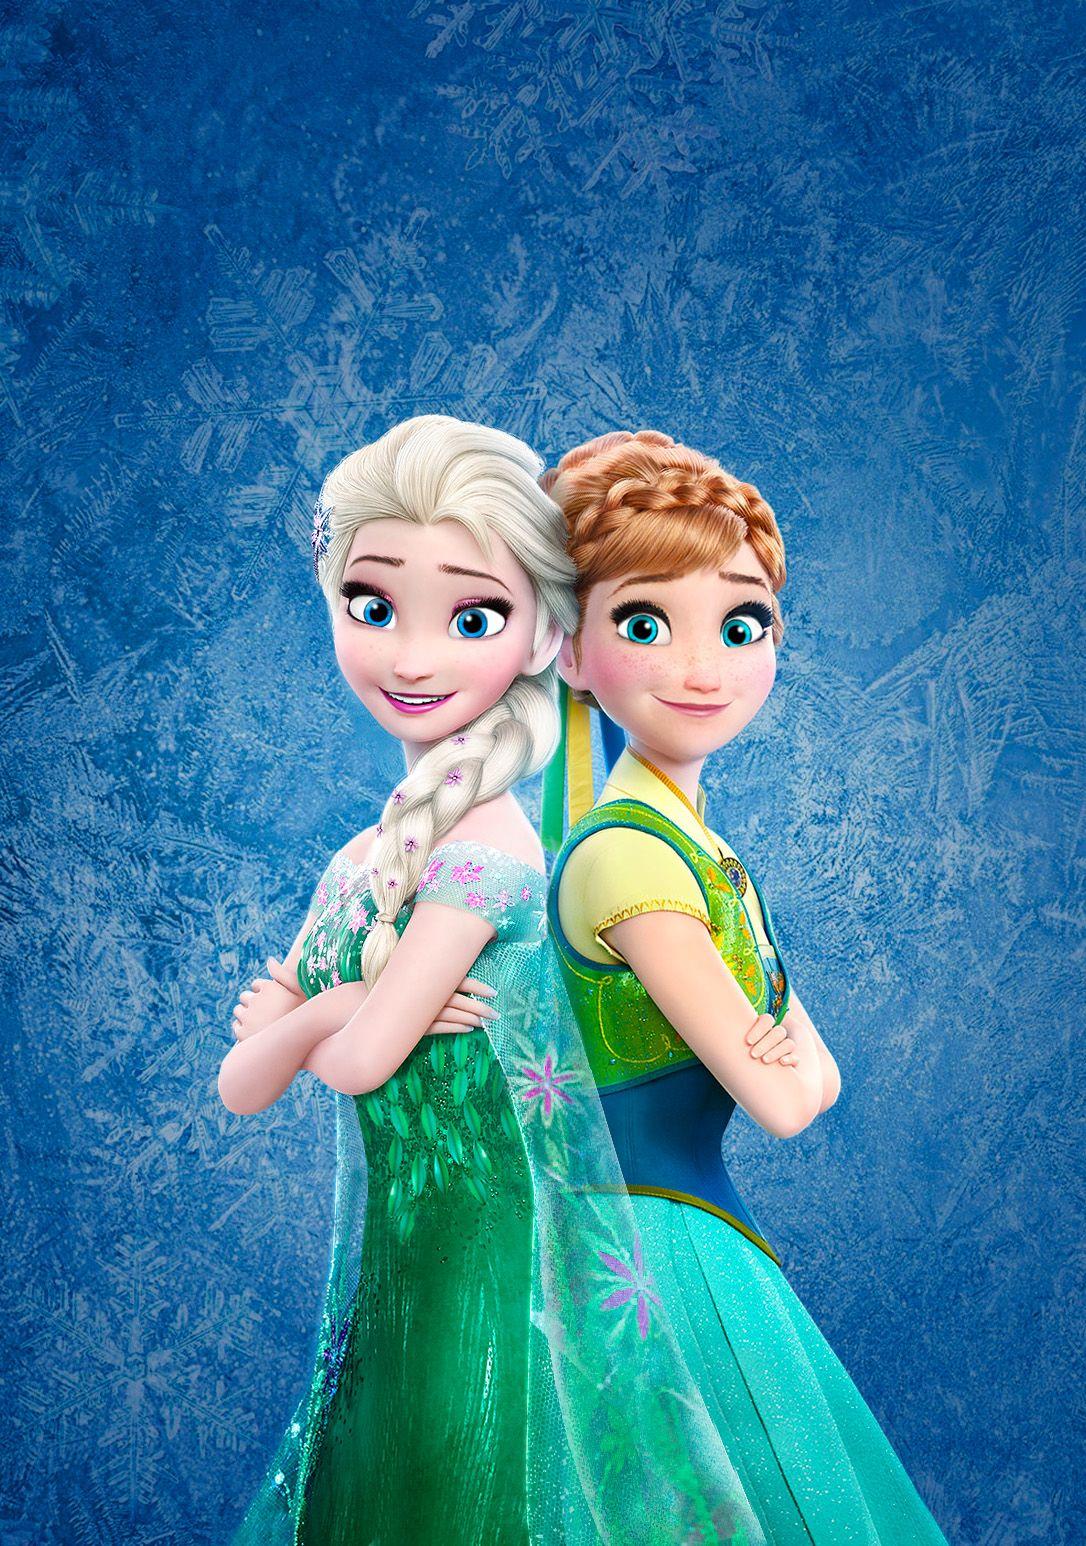 Discussion! What did you guys think of Frozen Fever? Comment